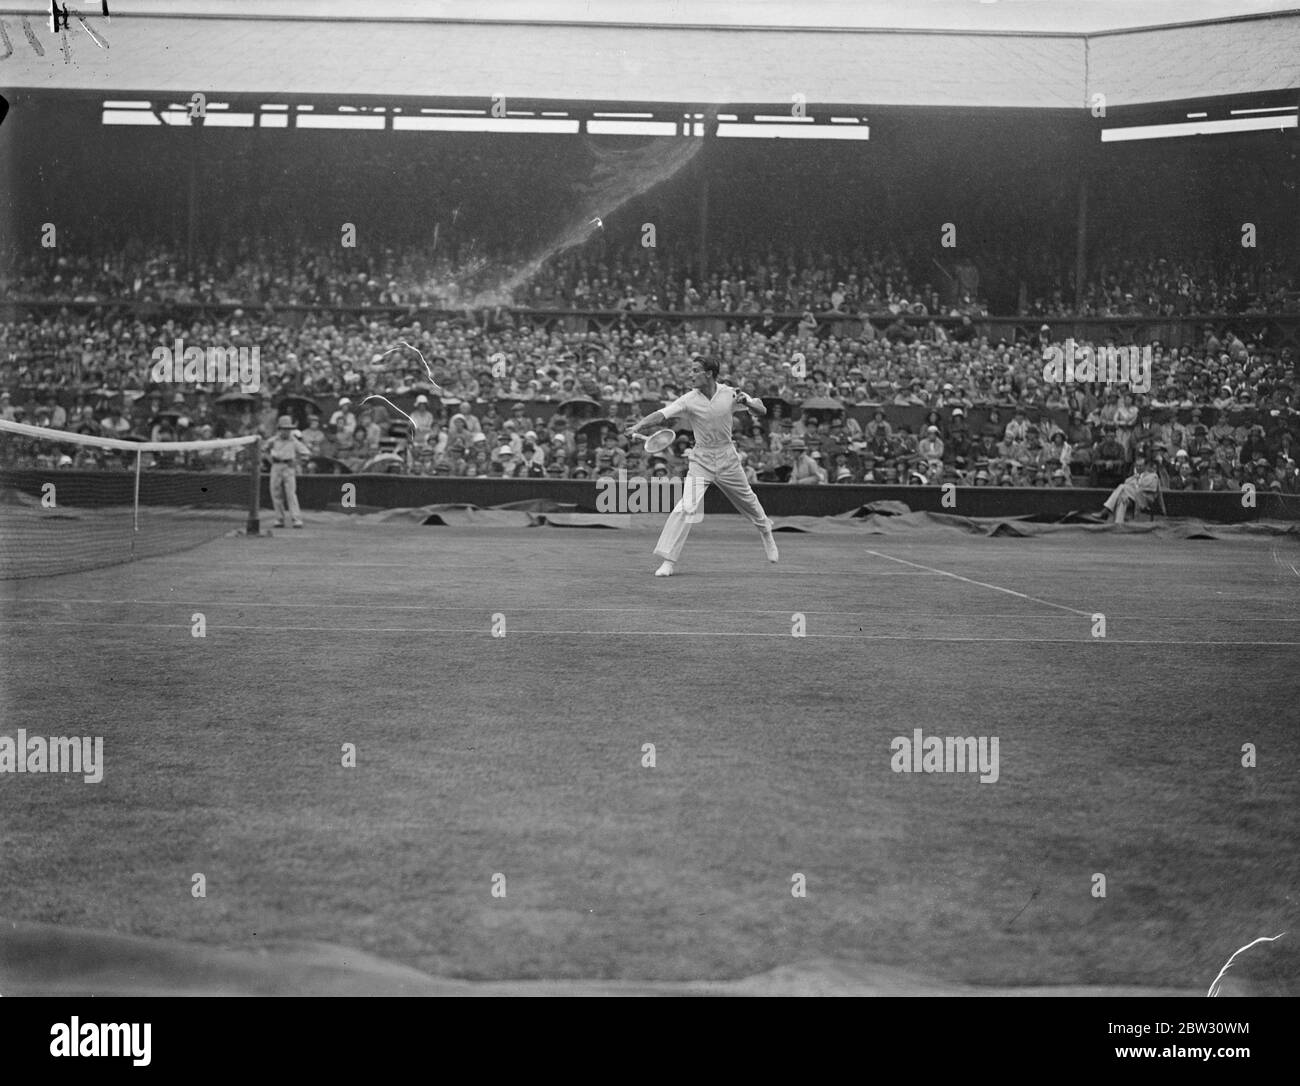 Austin wins in semi finals at Wimbledon . H W  Bunny  Austin , the English tennis player , defeated Satoh of Japan in the semi finals of the men 's singles in the Wimbledon tennis championships . Austin in play during the match . 30 June 1932 Stock Photo